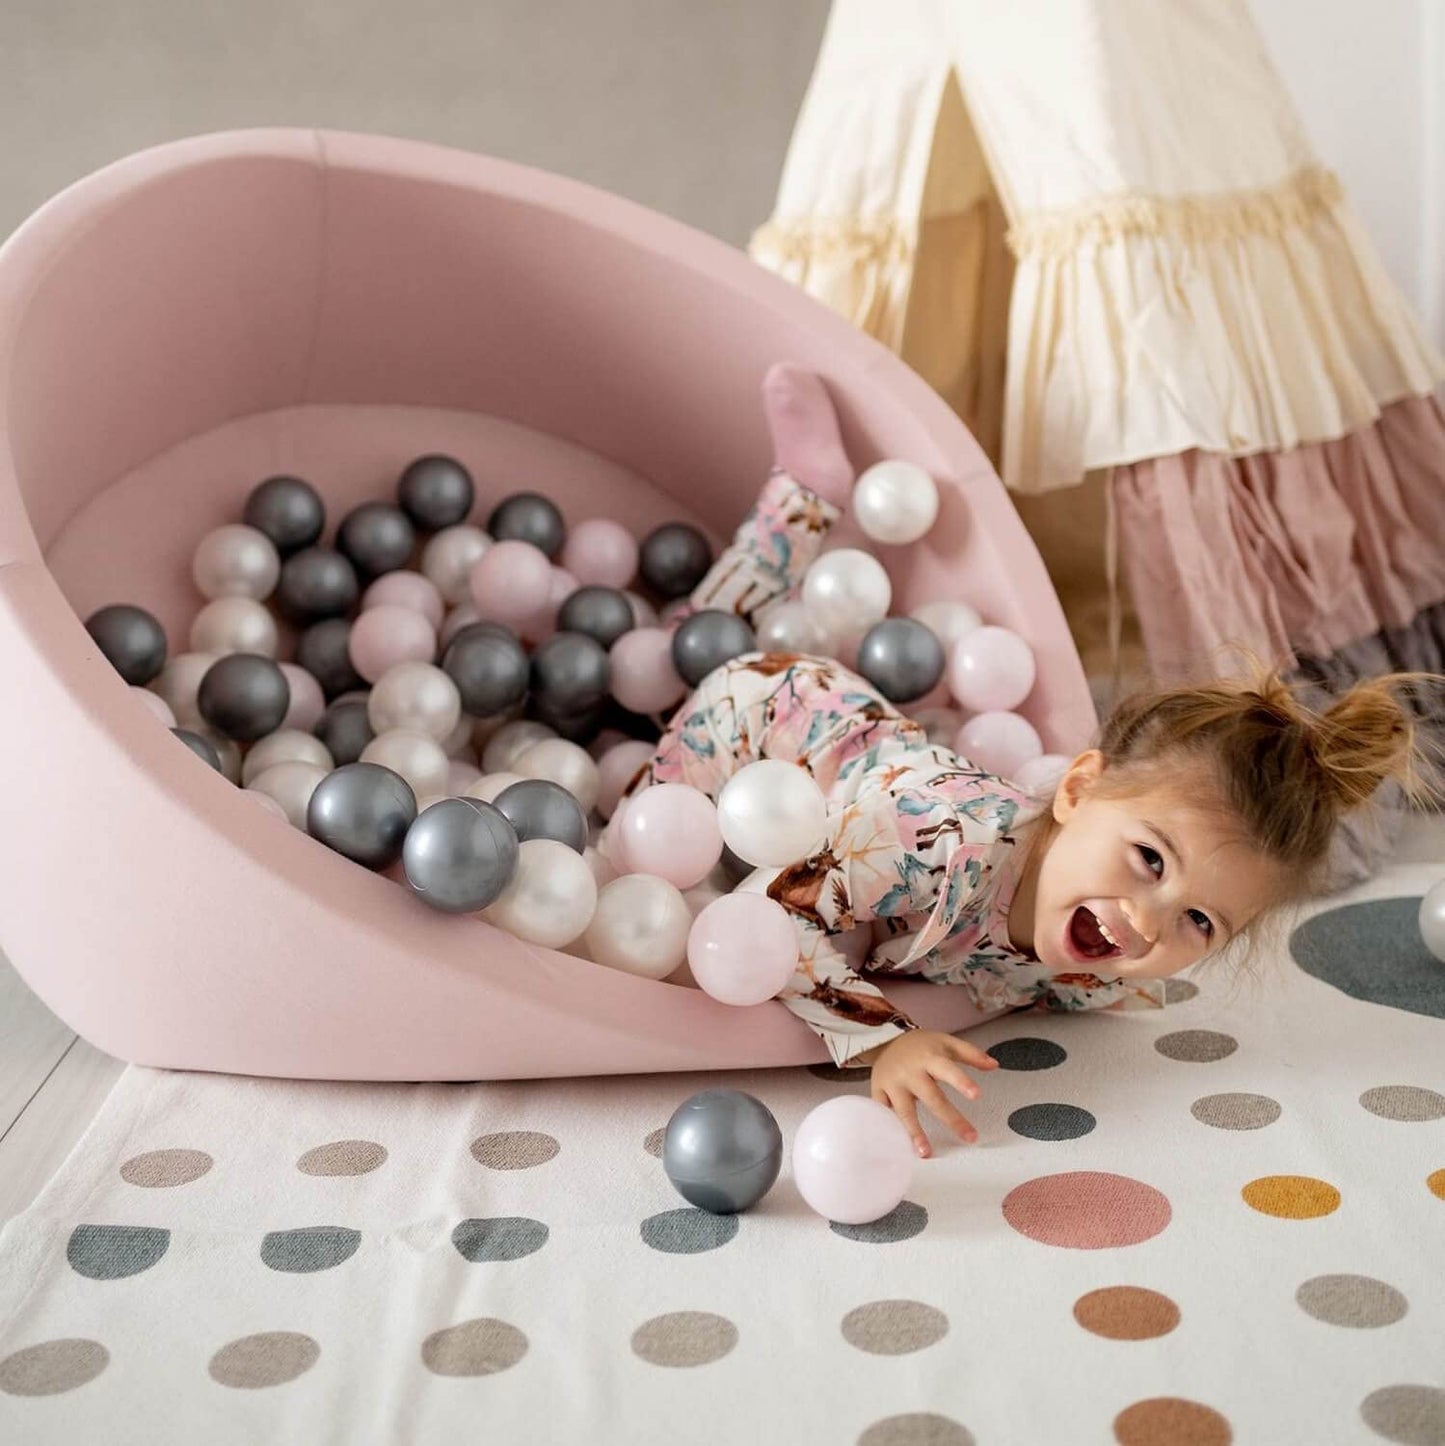 Misioo Ball Pit "Smart" with 300 Balls